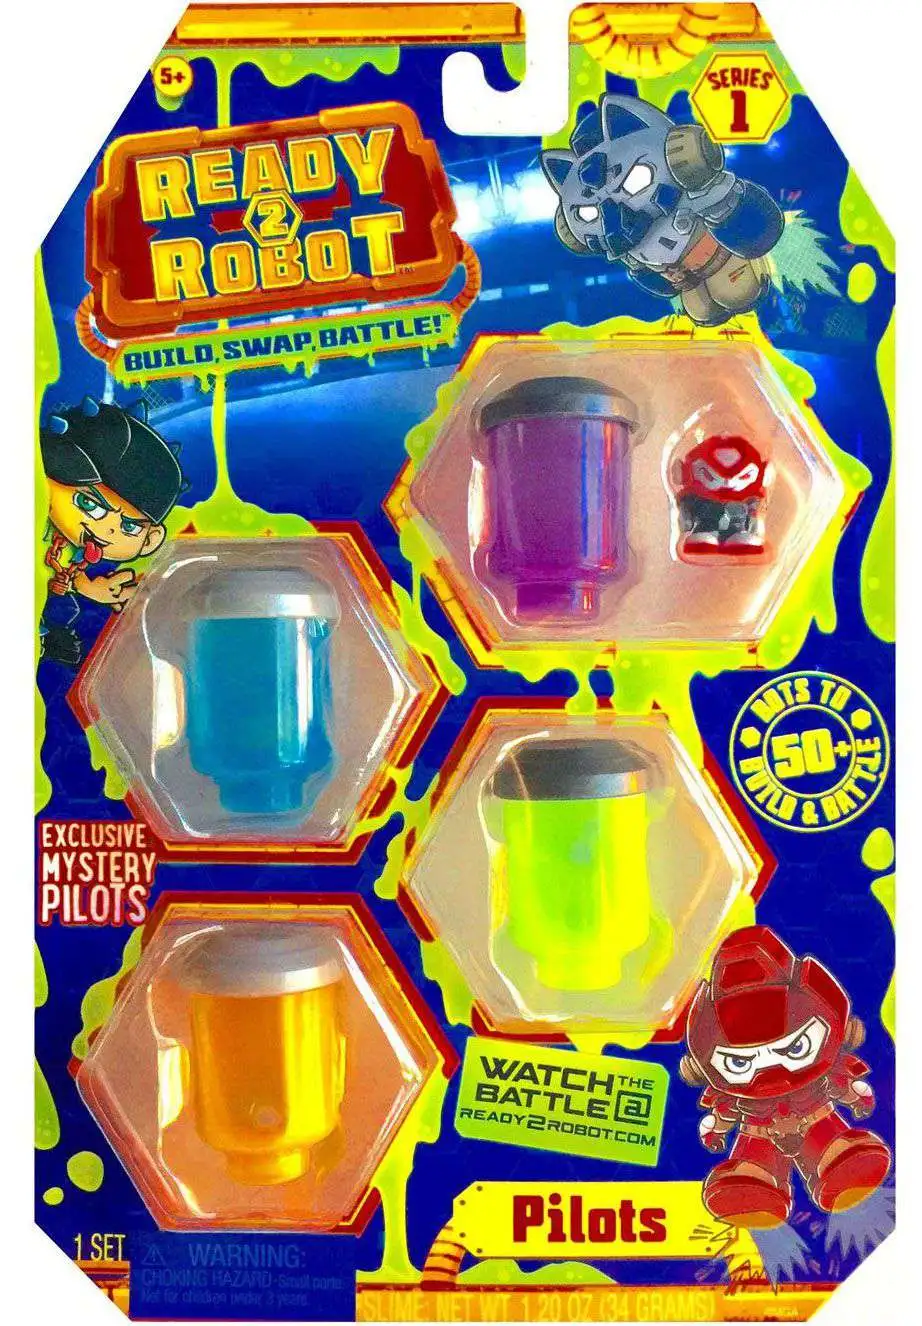 Ready 2 Robot Series 1 Collectible Toy Lot of 4 Exclusive Mystery Pilots NEW!! 